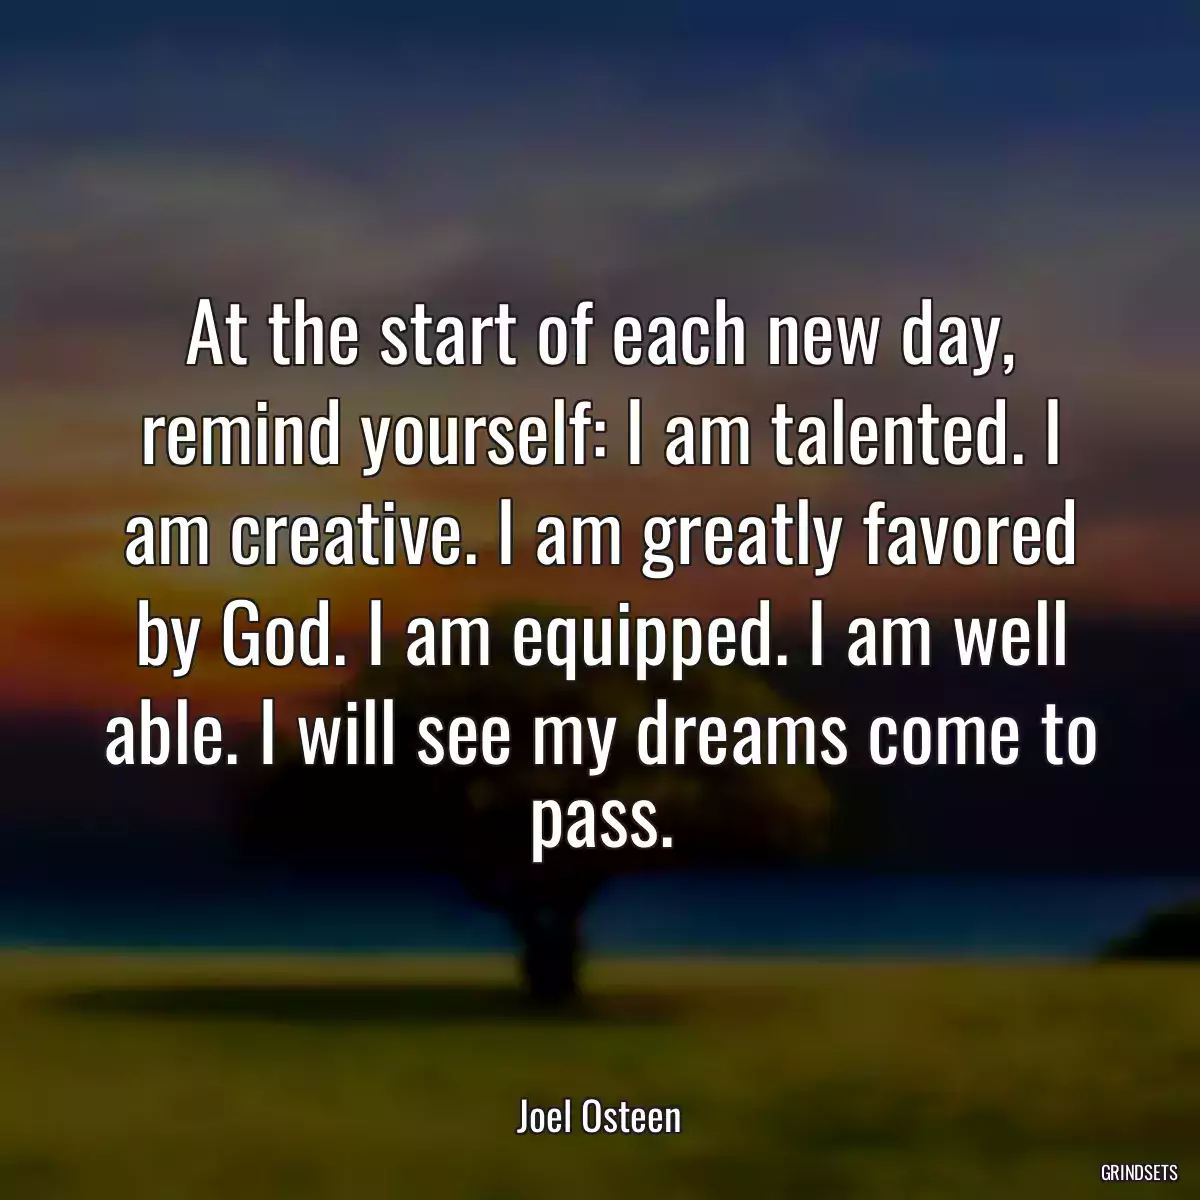 At the start of each new day, remind yourself: I am talented. I am creative. I am greatly favored by God. I am equipped. I am well able. I will see my dreams come to pass.